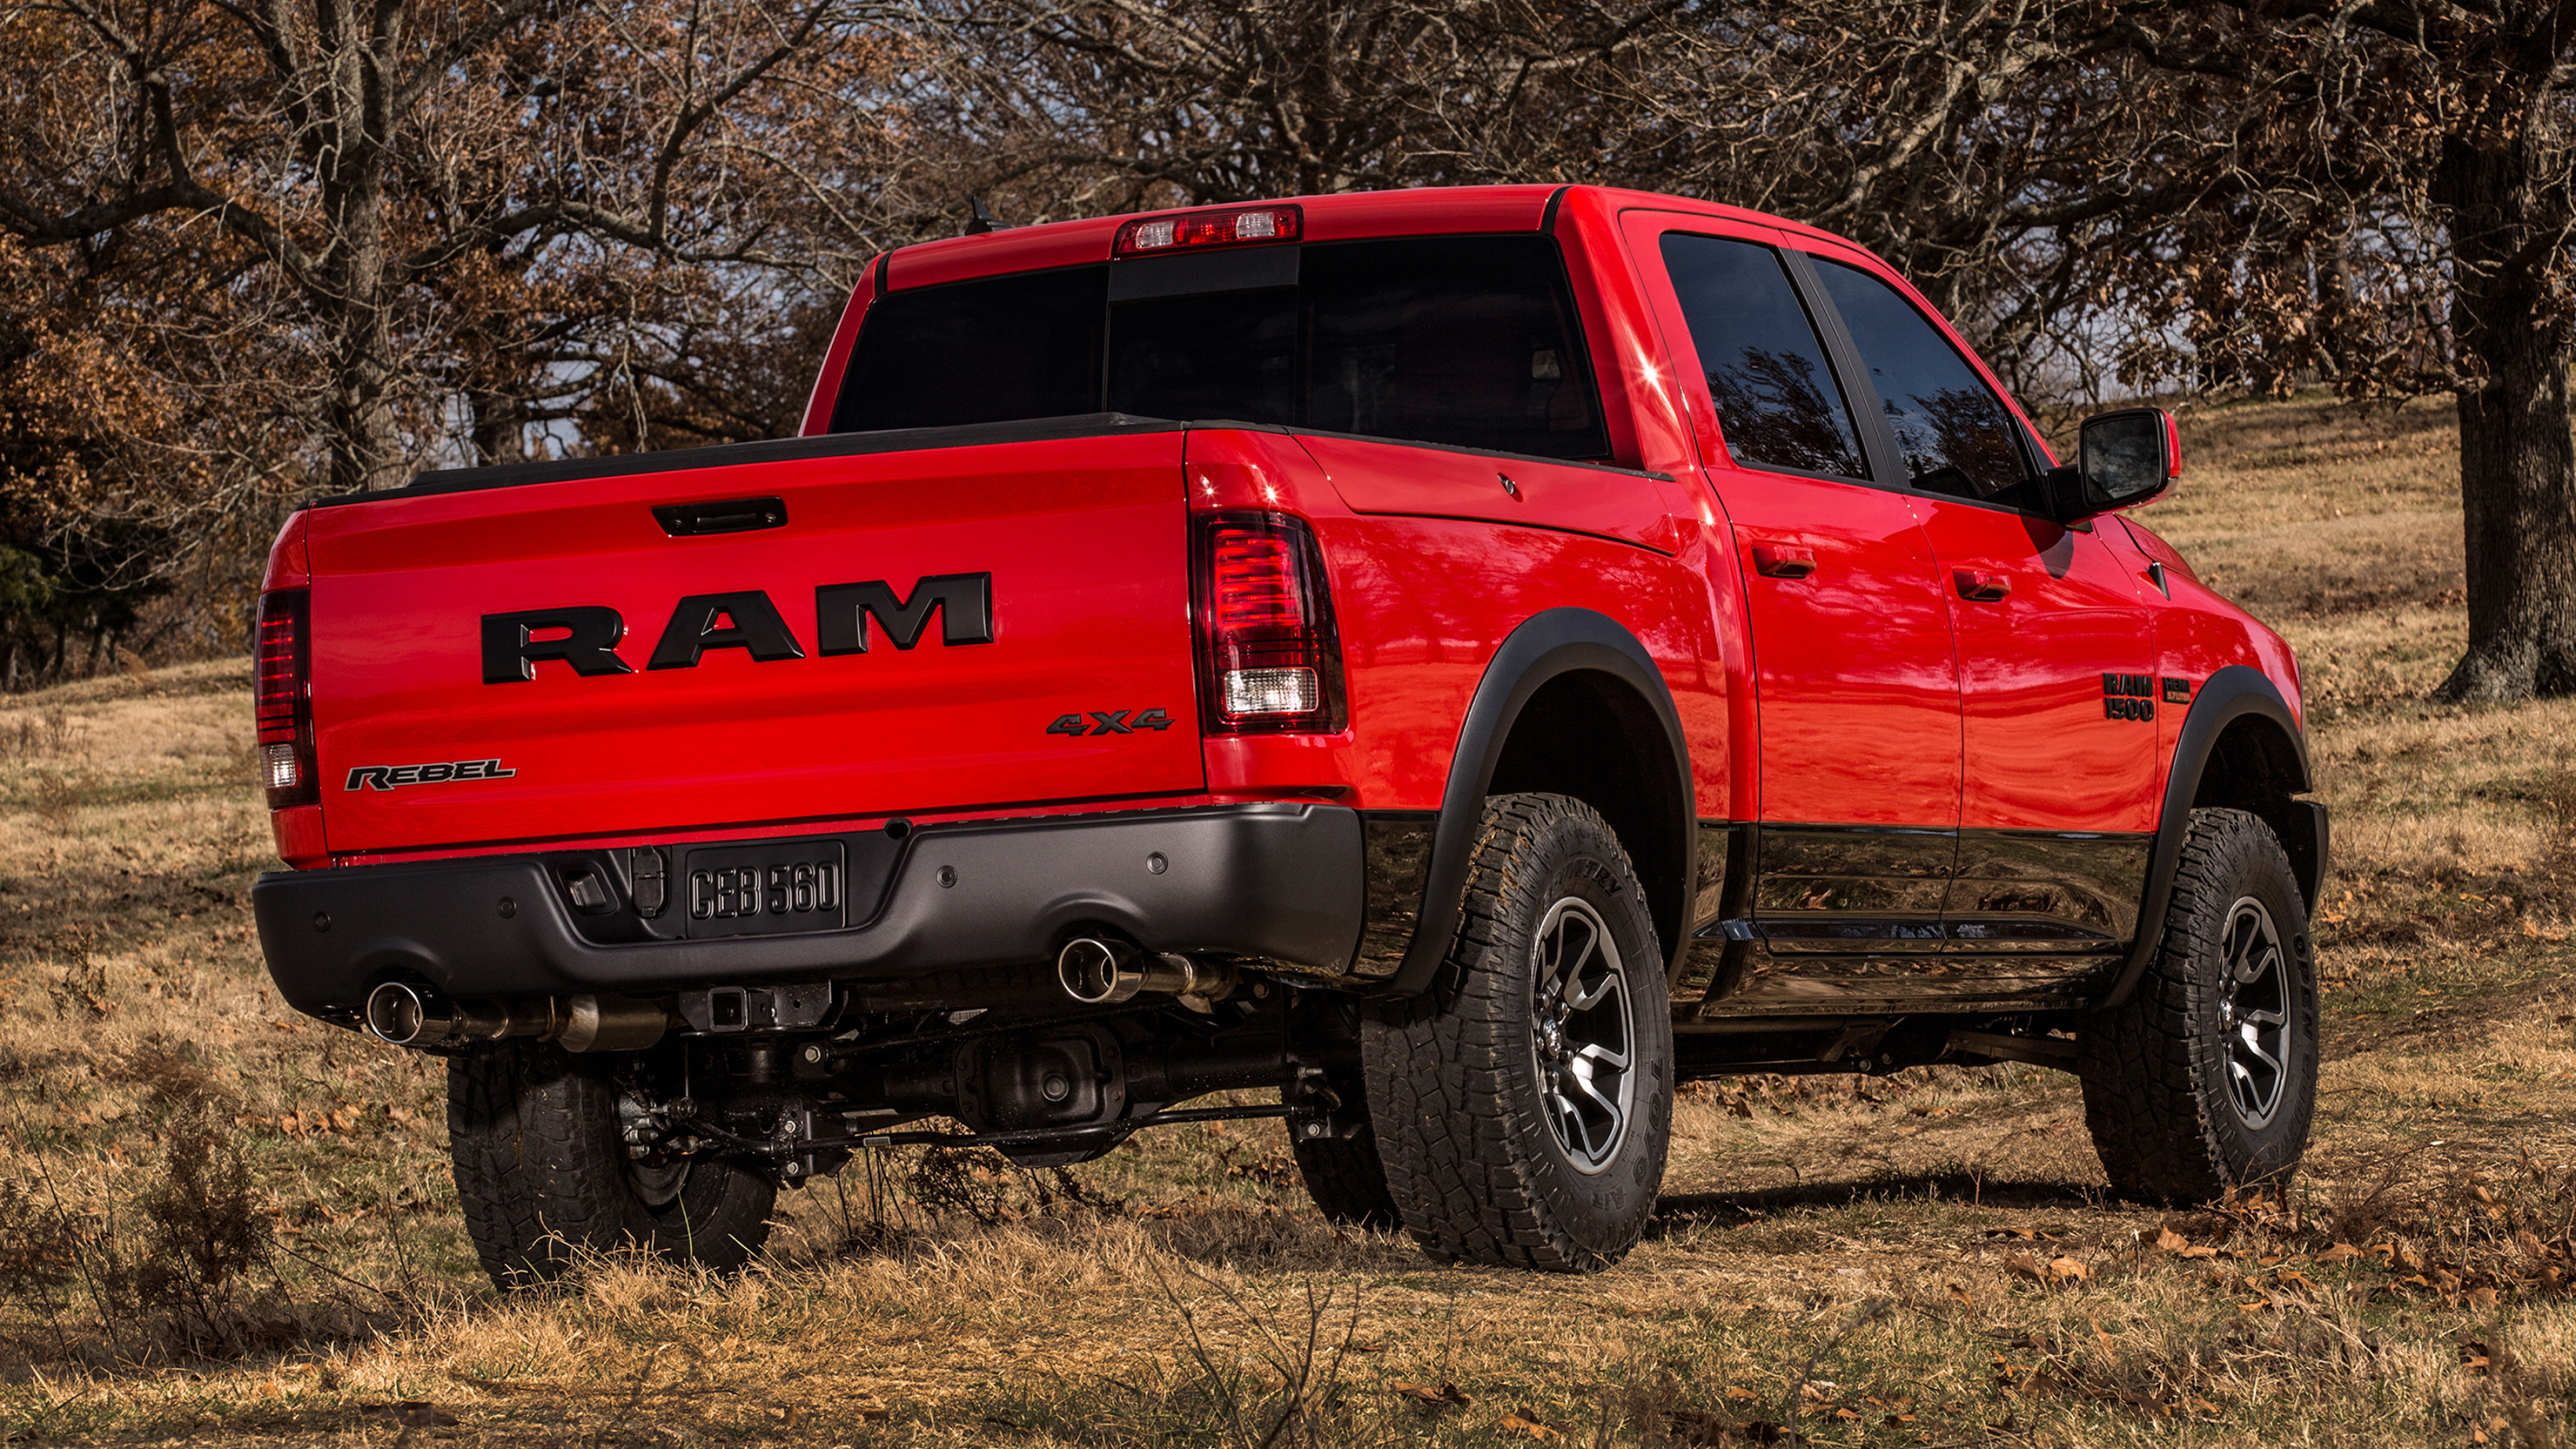 Ram 1500, Powerful and capable, Tough and rugged, Uncompromising performance, 3840x2160 4K Desktop